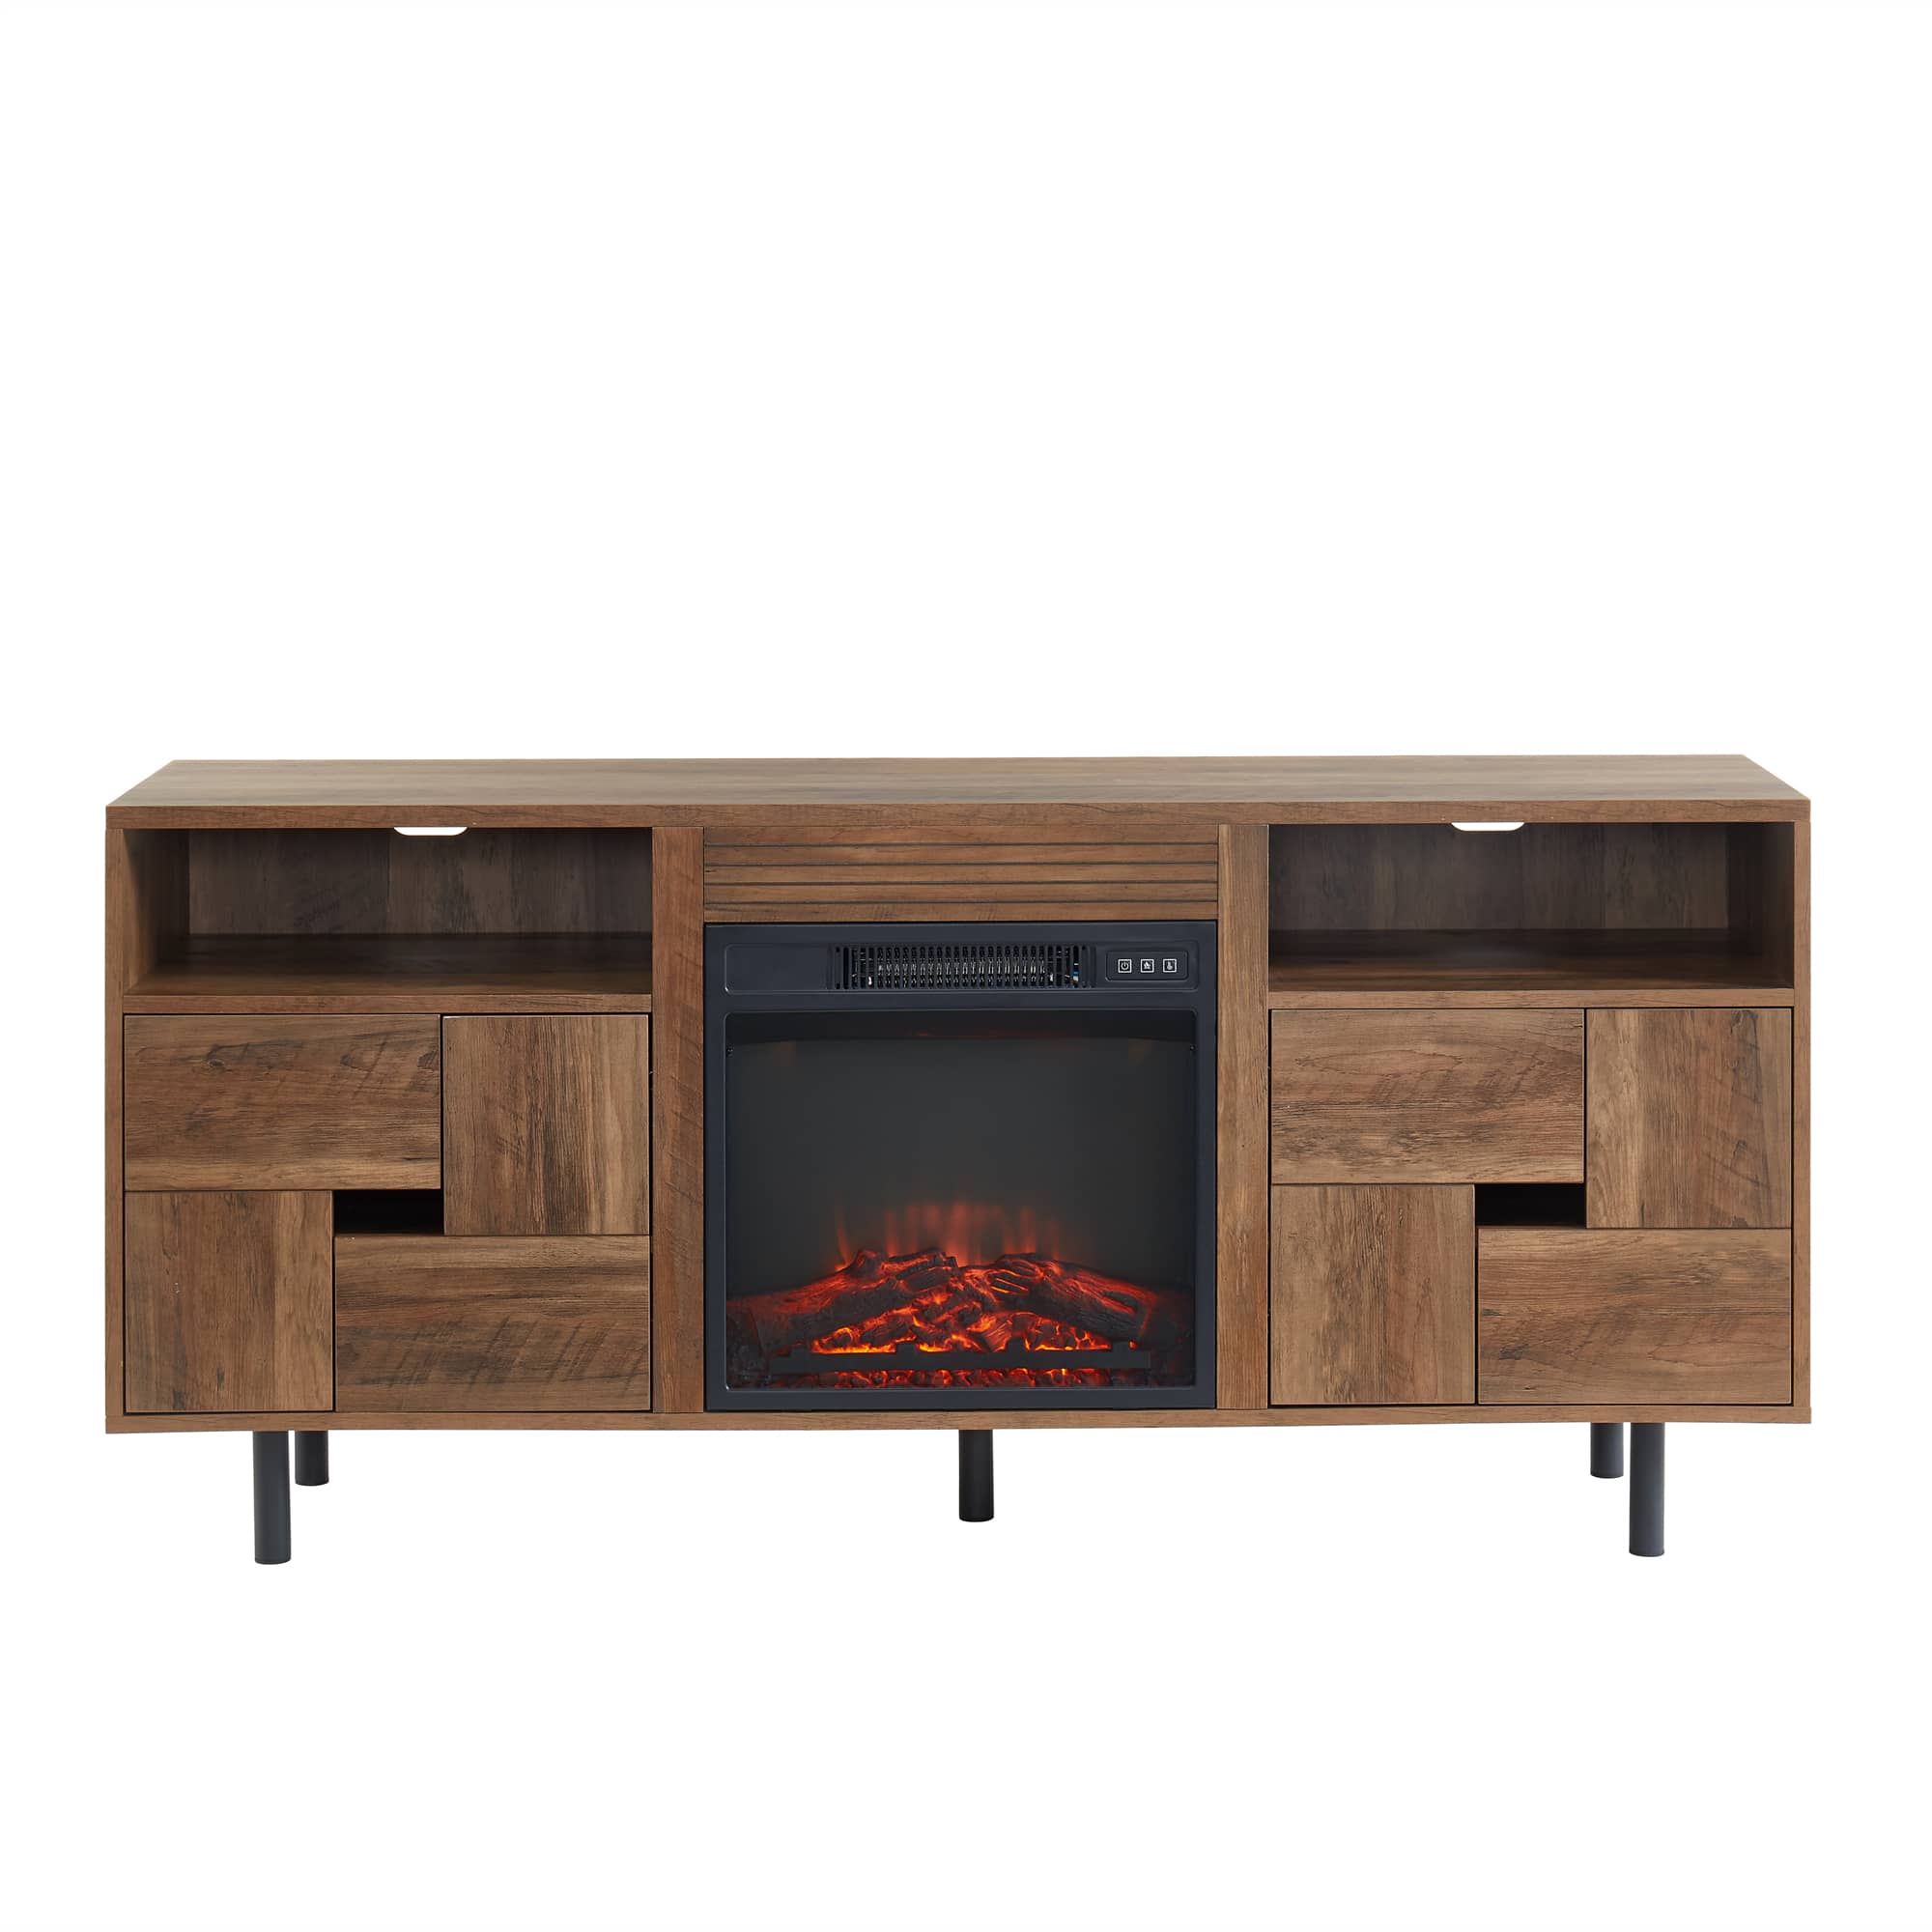 CASAINC 60 in. W Freestanding Wooden Storage Electric Fireplace TV Stand with Fits TVs up to 70 in.